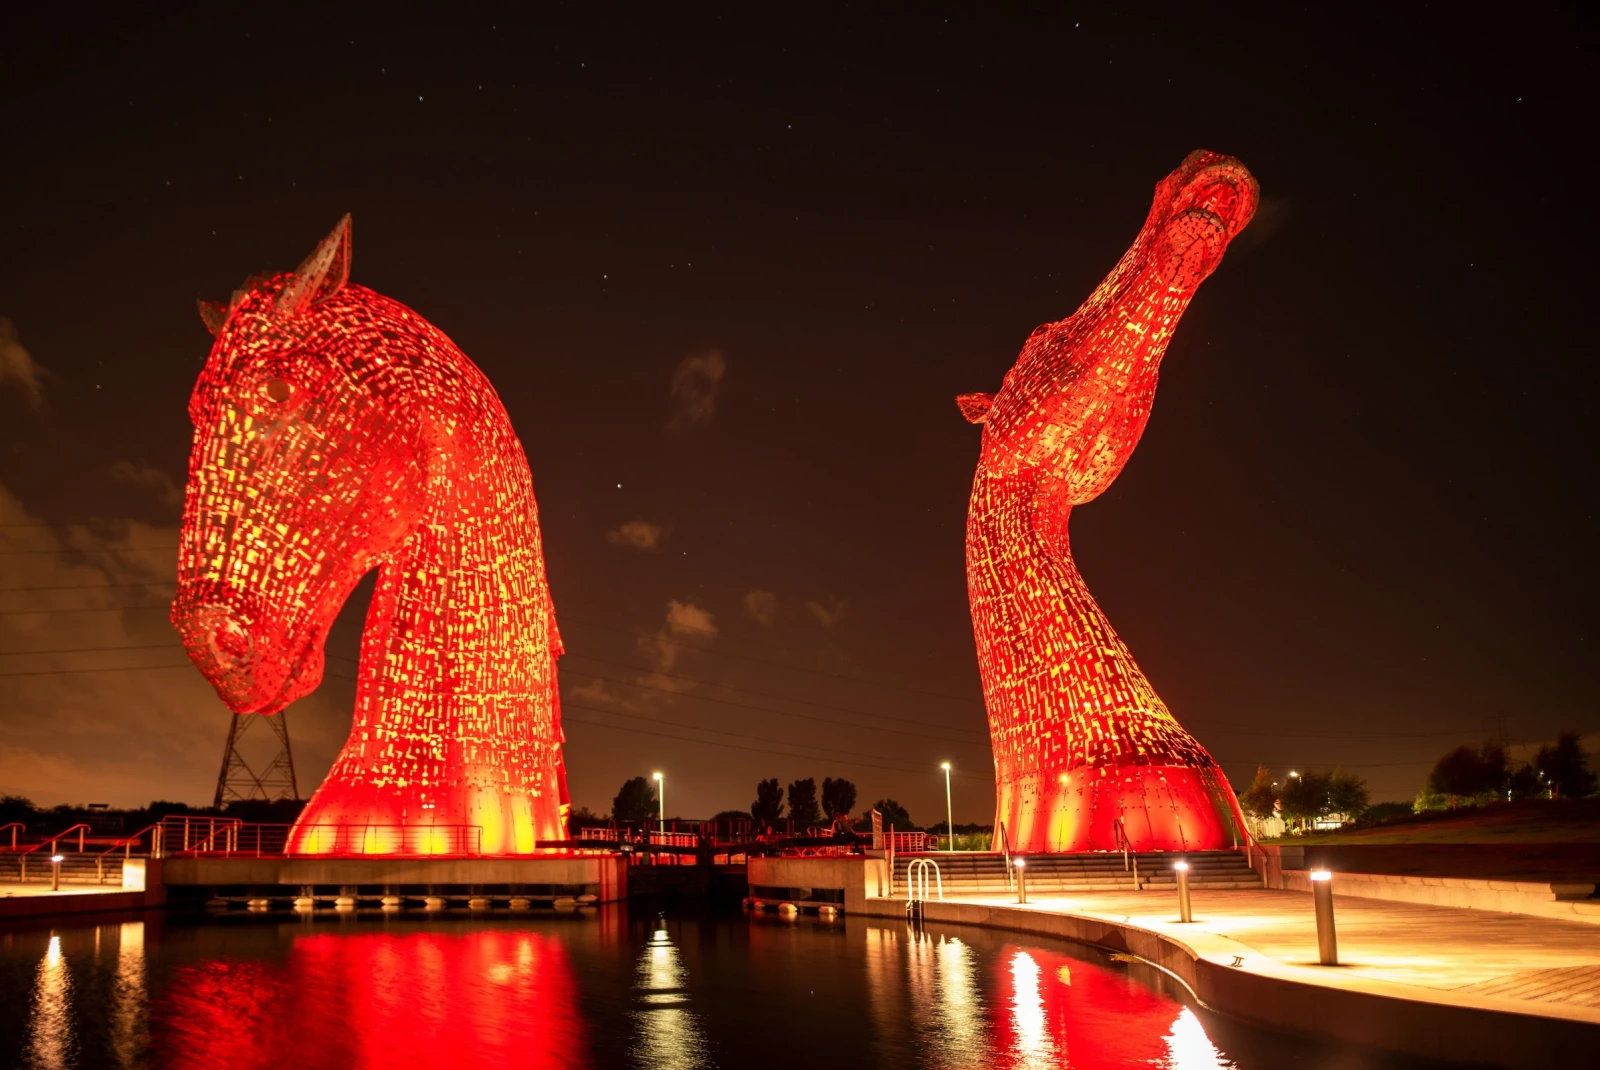 Night time at The Kelpies.